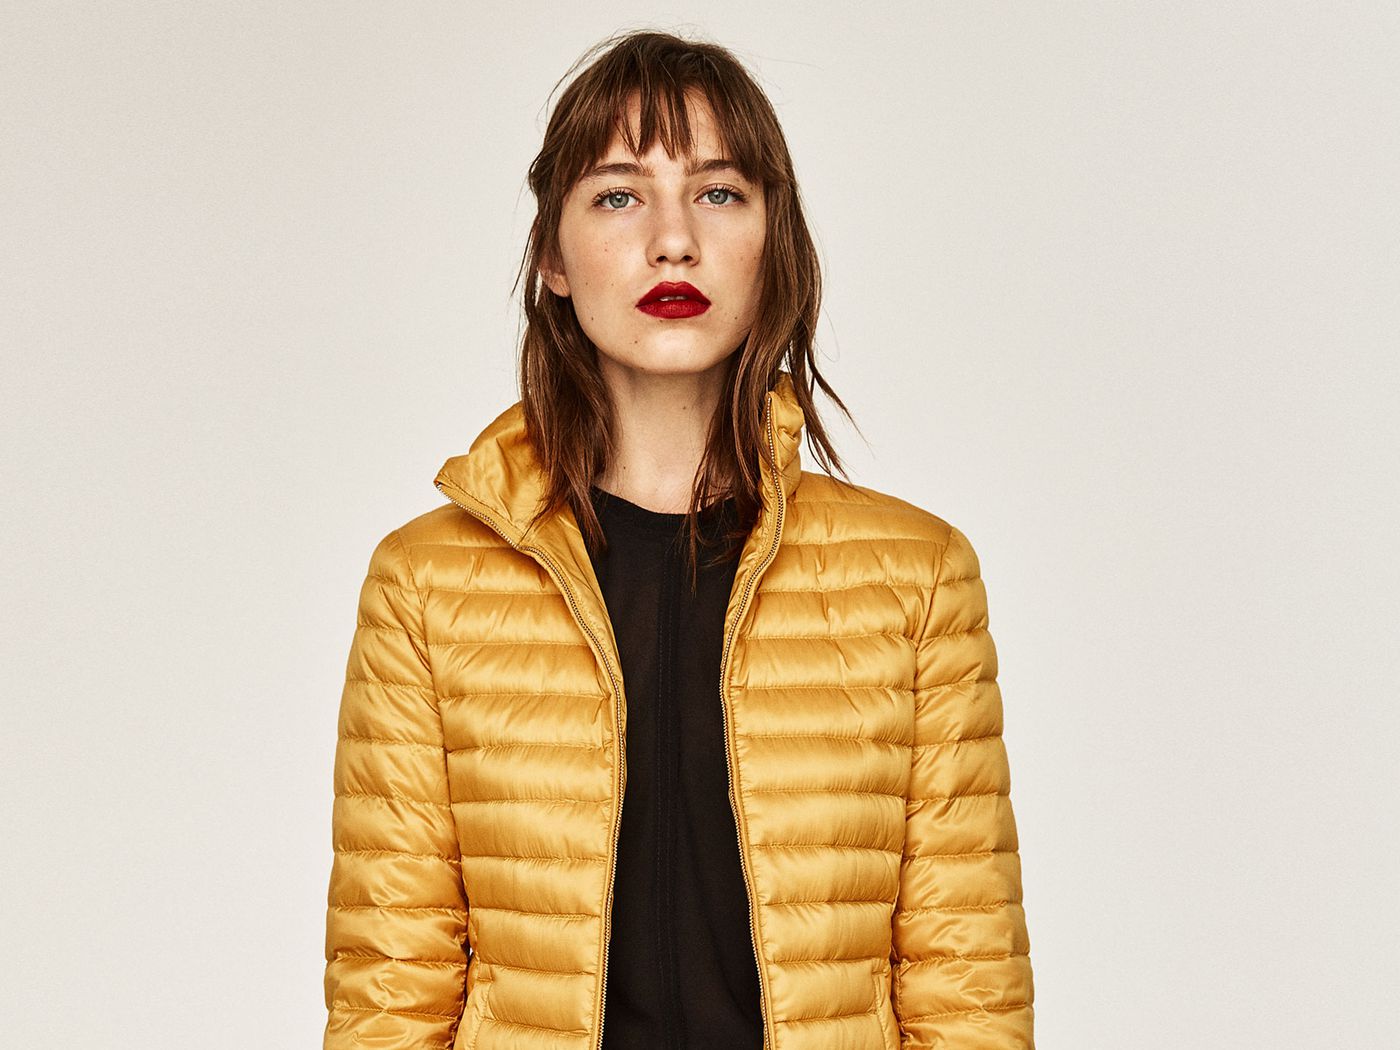 All These Awesome Winter Coats Are on Sale Right Now - Racked